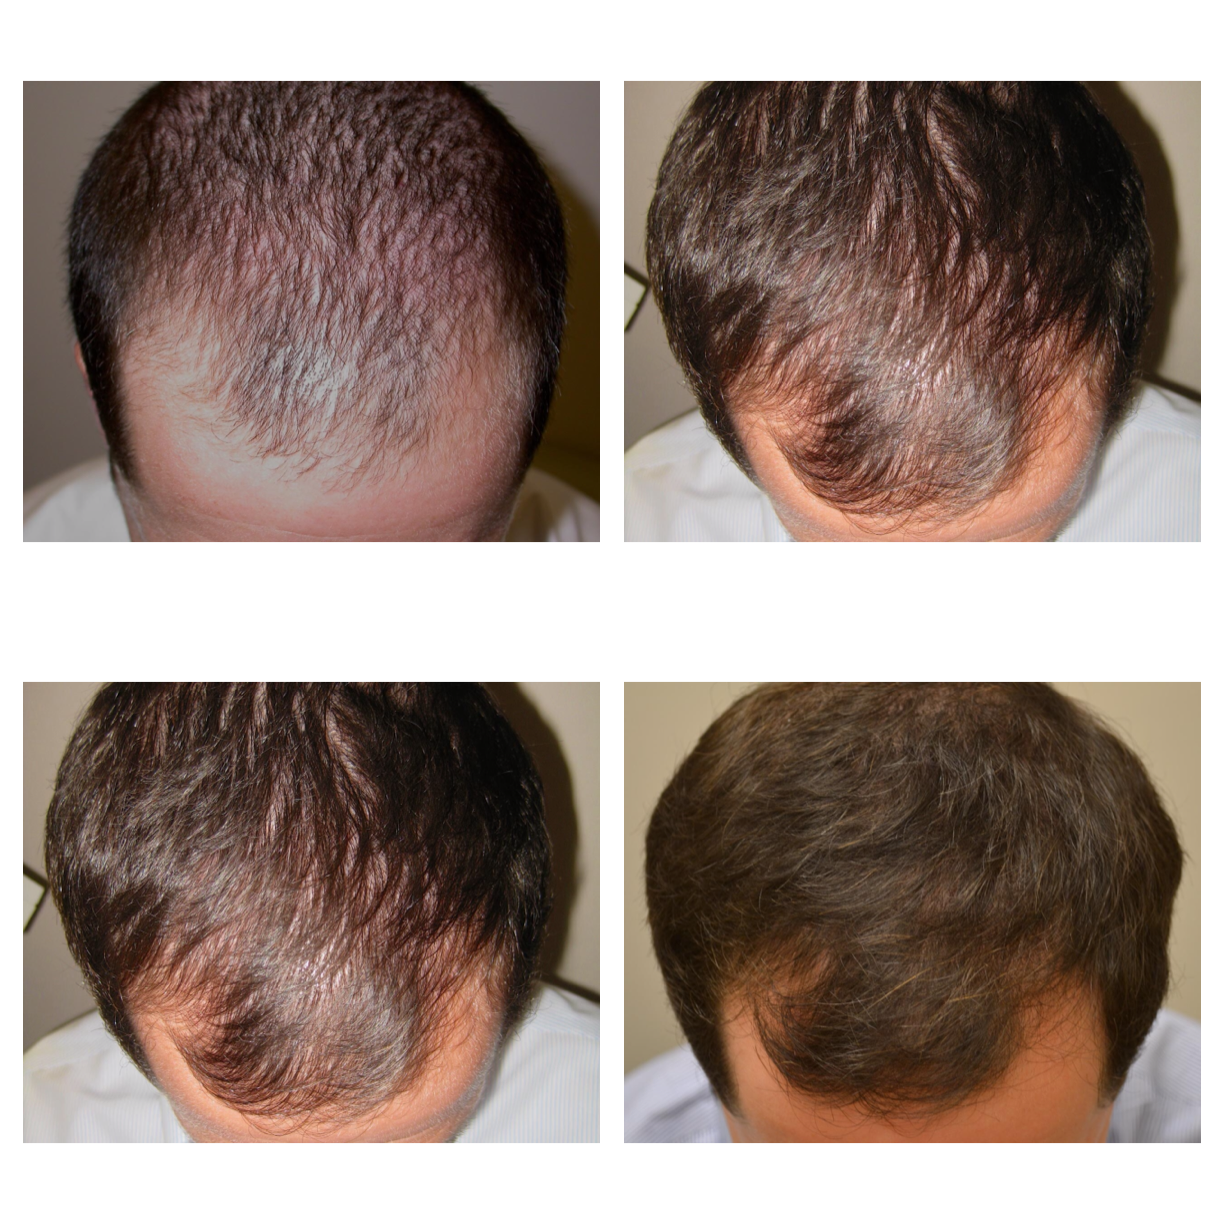 Minoxidil Kazakhstan on Twitter: "Photos taken Before and After 1-6 Months using of the Minoxidil 5%. Real Real results. Real photos. It works / Twitter